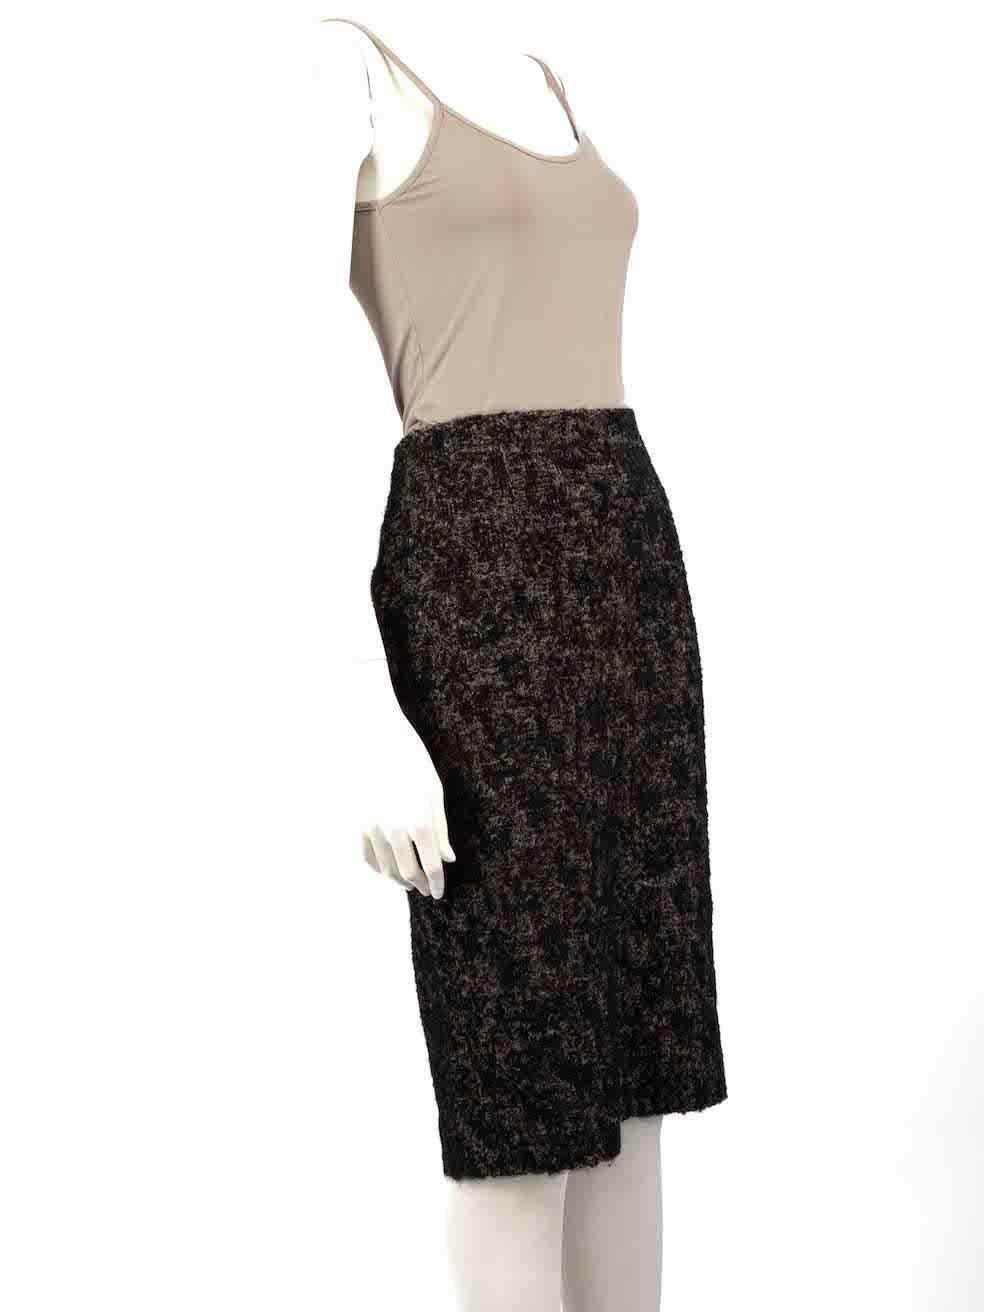 CONDITION is Very good. Hardly any visible wear to the skirt is evident on this used Bottega Veneta designer resale item.
 
 
 
 Details
 
 
 Black
 
 Linen
 
 Pencil skirt
 
 Knee length
 
 Back zip and hook fastening
 
 
 
 
 
 Made in Italy
 
 
